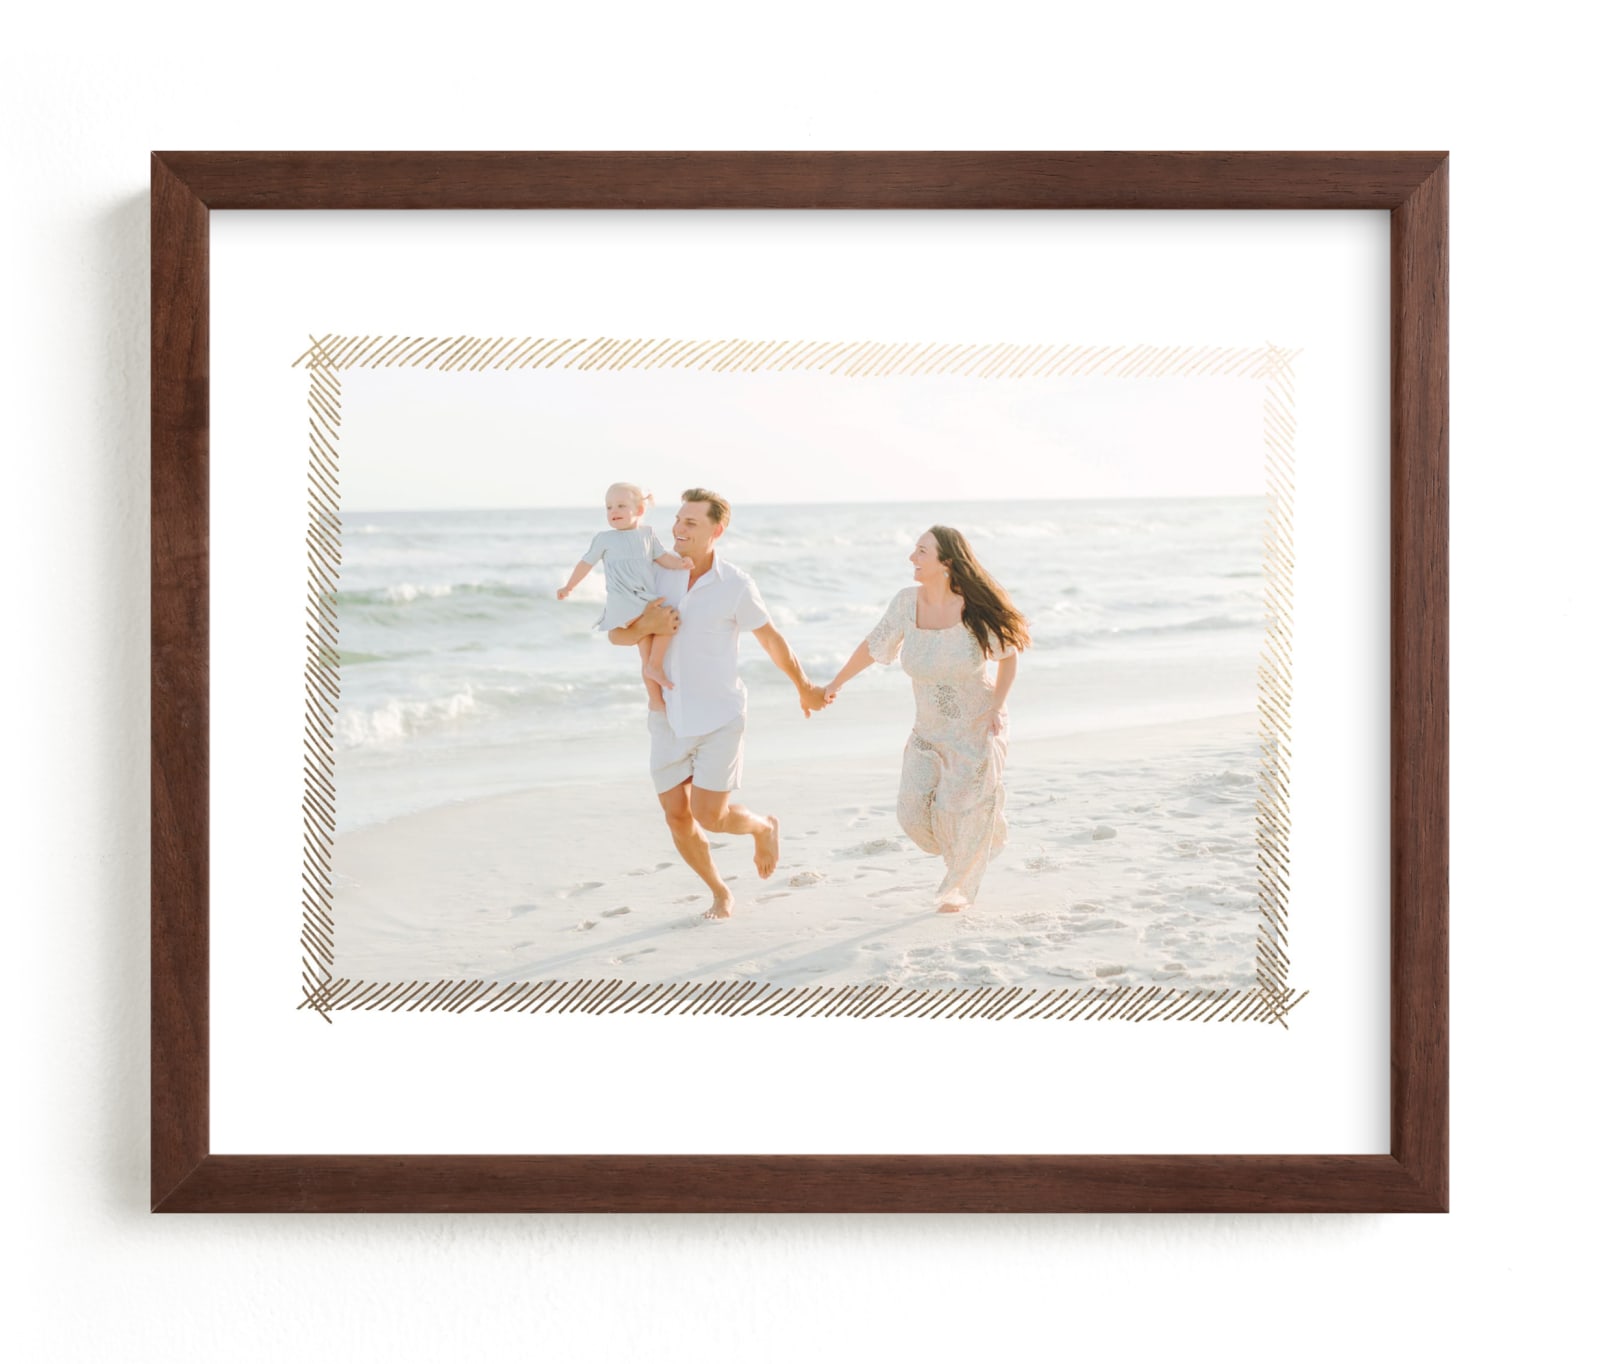 "Hand Sketched Frame" - Foil Pressed Photo Art Print by June Letters Studio in beautiful frame options and a variety of sizes.